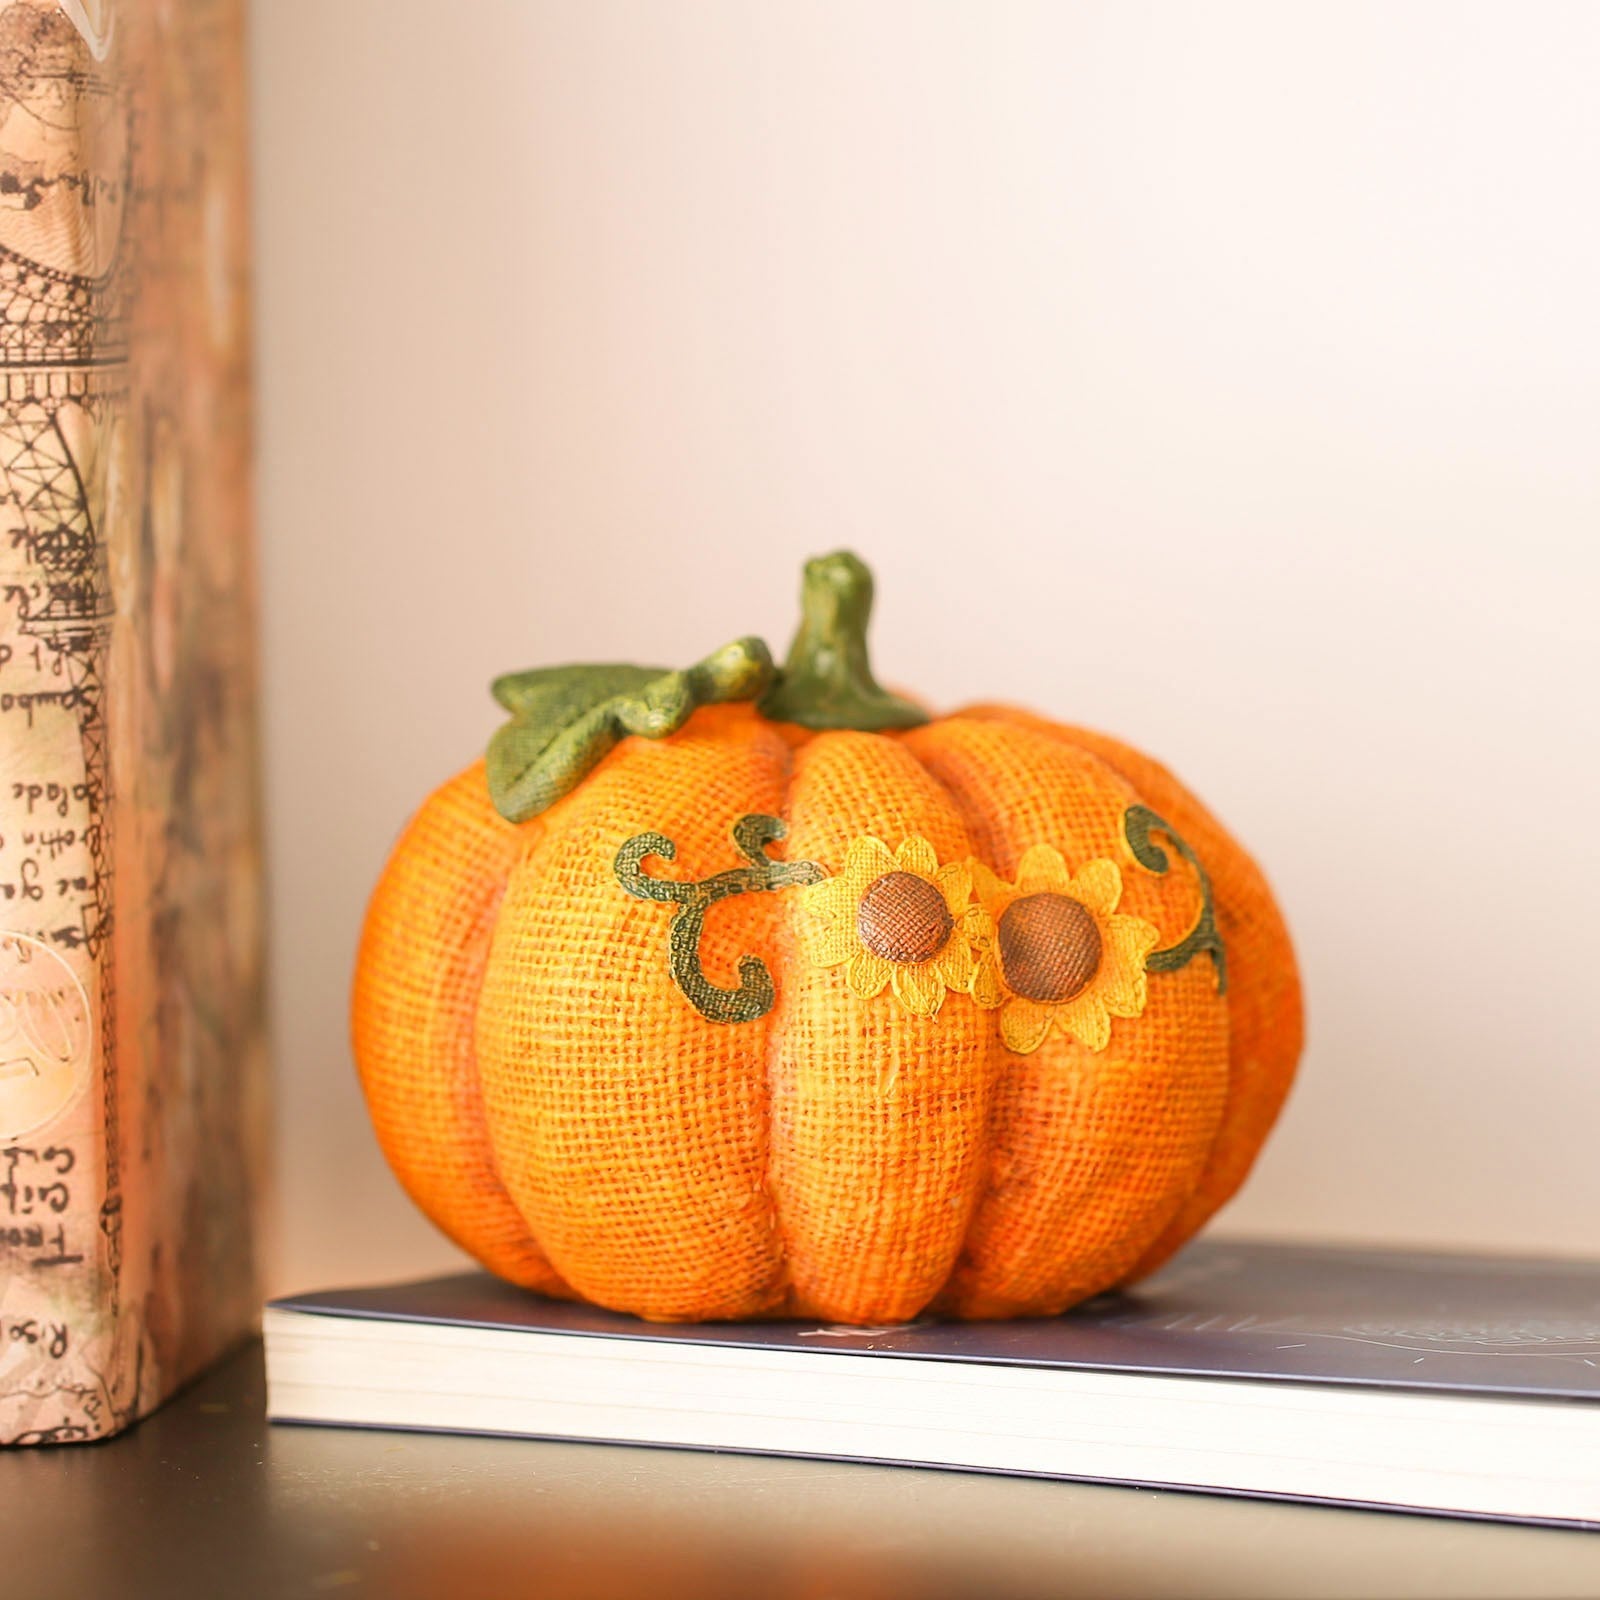 Give your home a warm and cozy feel with this festive pumpkin ornament